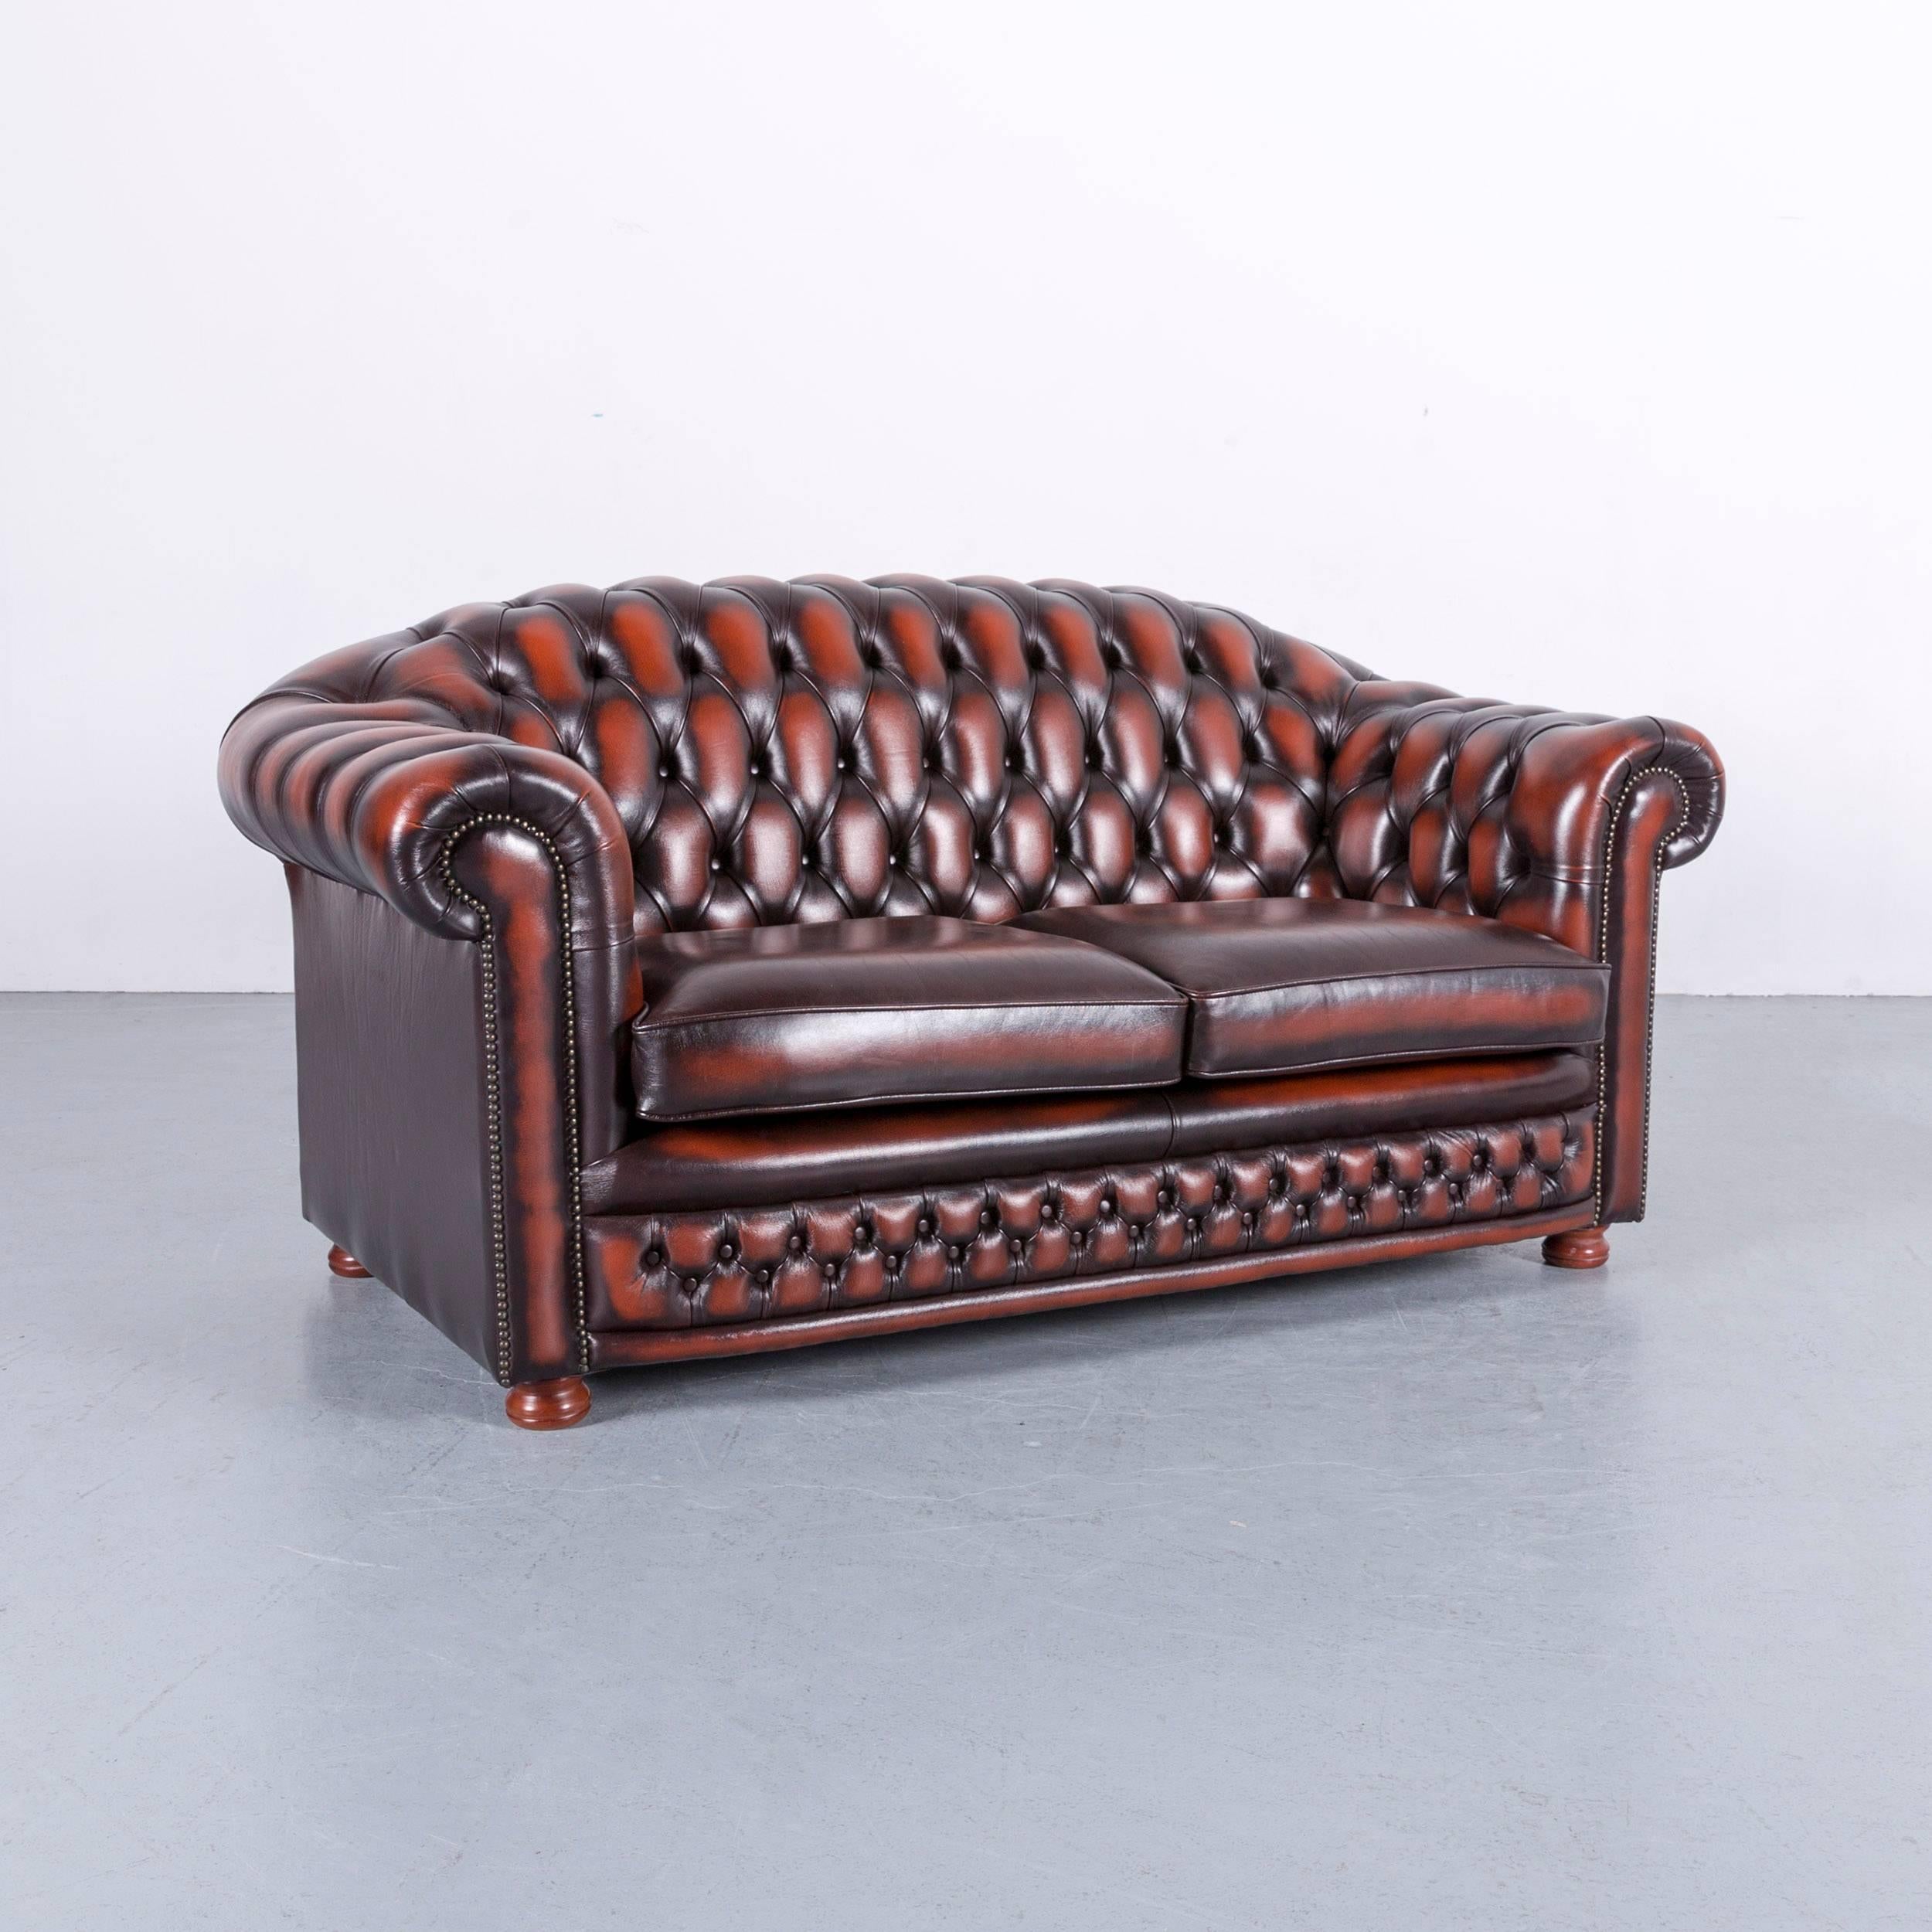 Chesterfield Leather Sofa Brown Orange Two-Seat In Excellent Condition For Sale In Cologne, DE